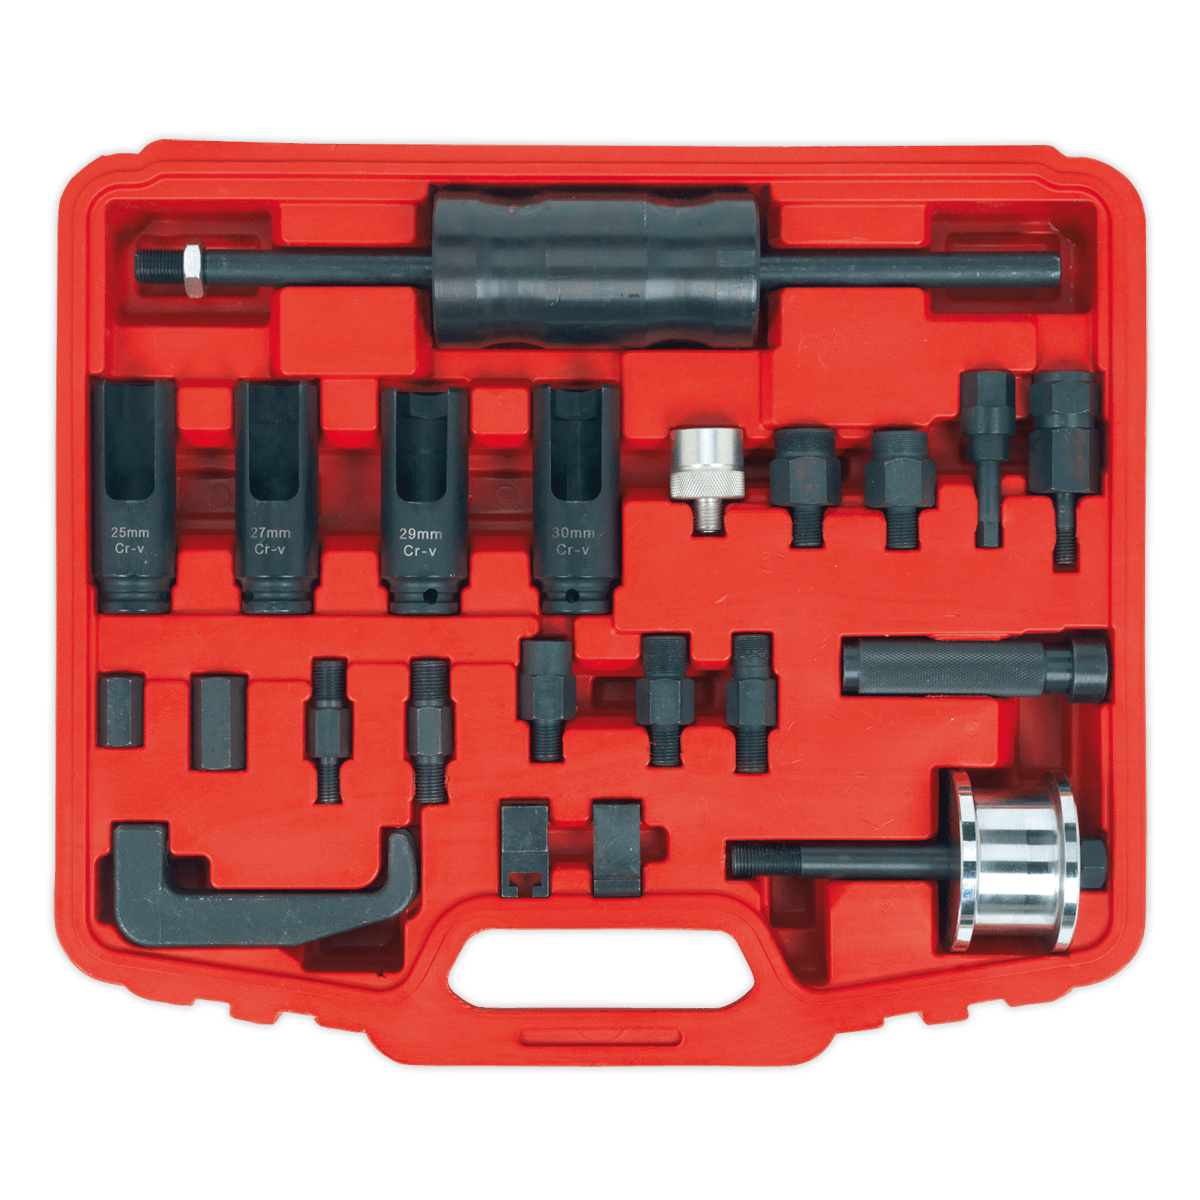 Diesel Injector Master Kit | Suitable for the removal of Bosch, Delphi, Denso, Siemens and Pumpe Duse diesel injectors. | toolforce.ie